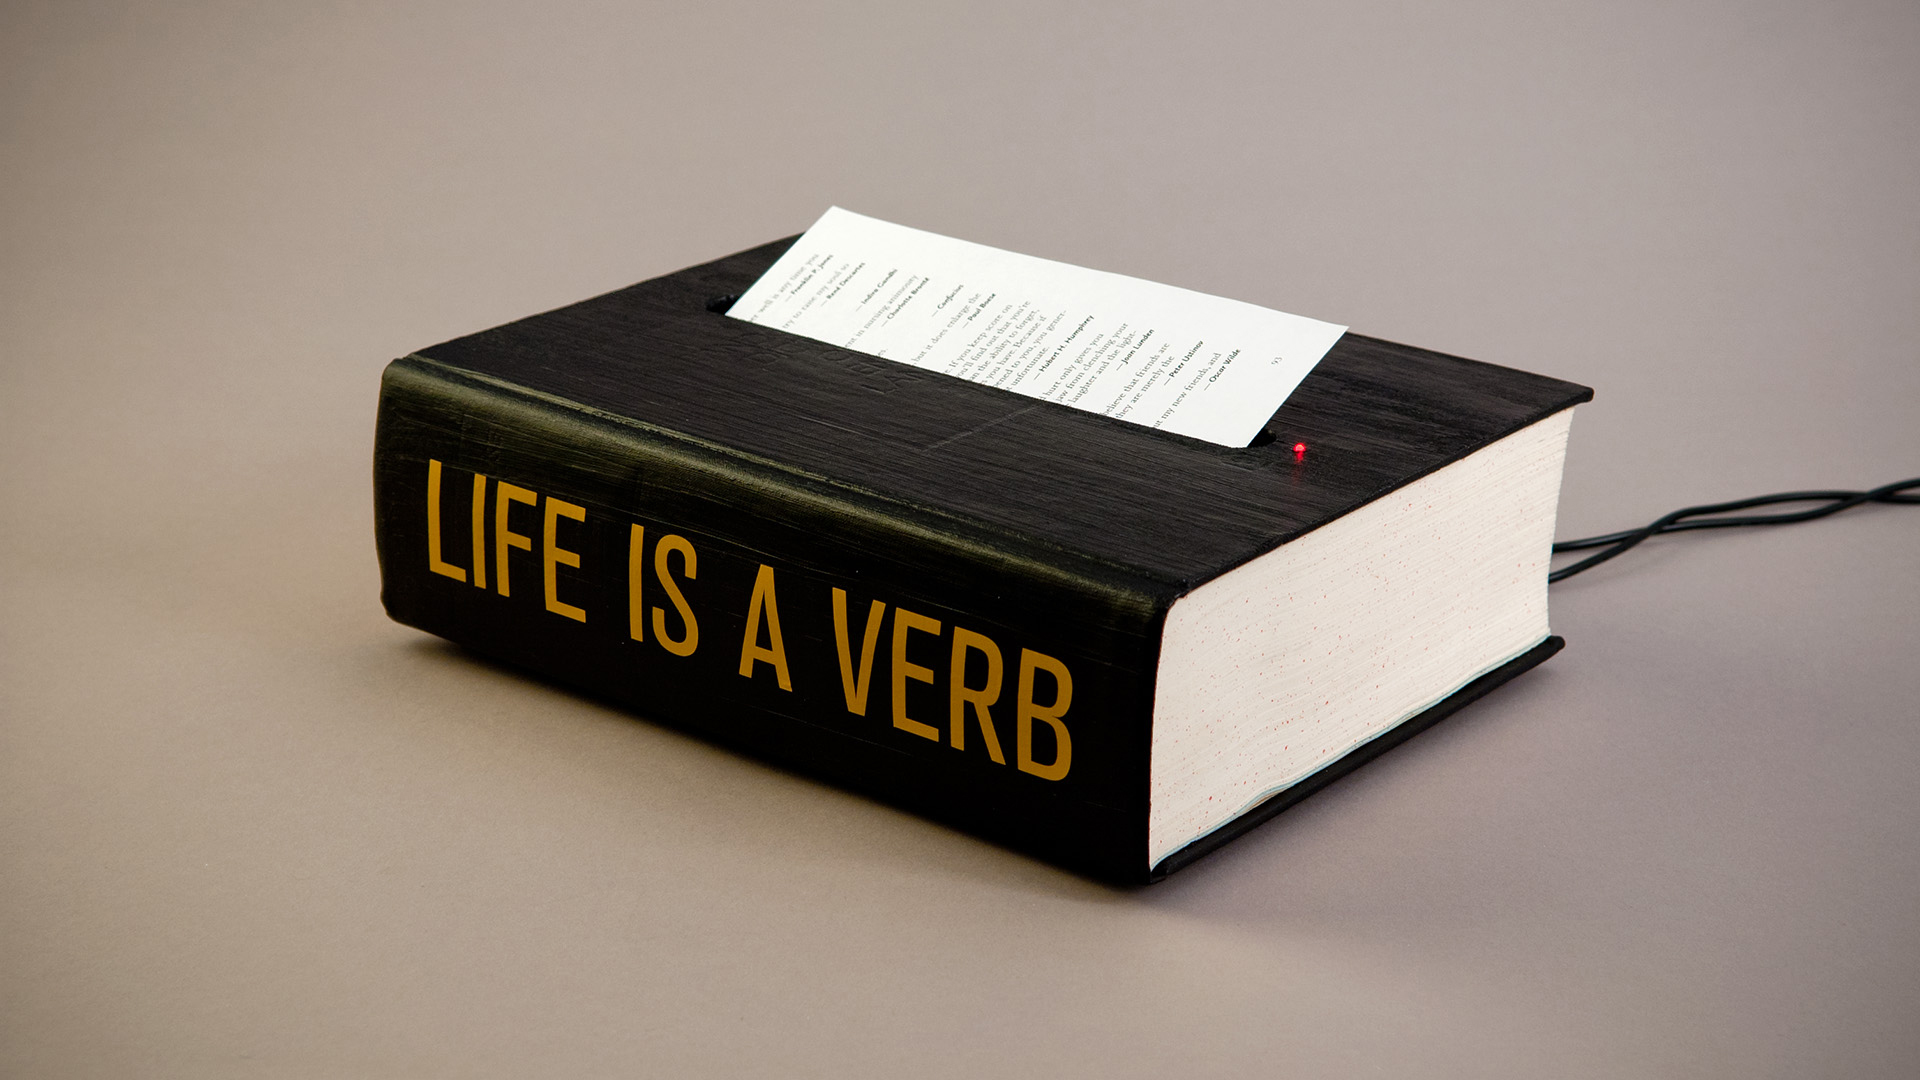 Life is a Verb: the book of spoken wisdom © 2014